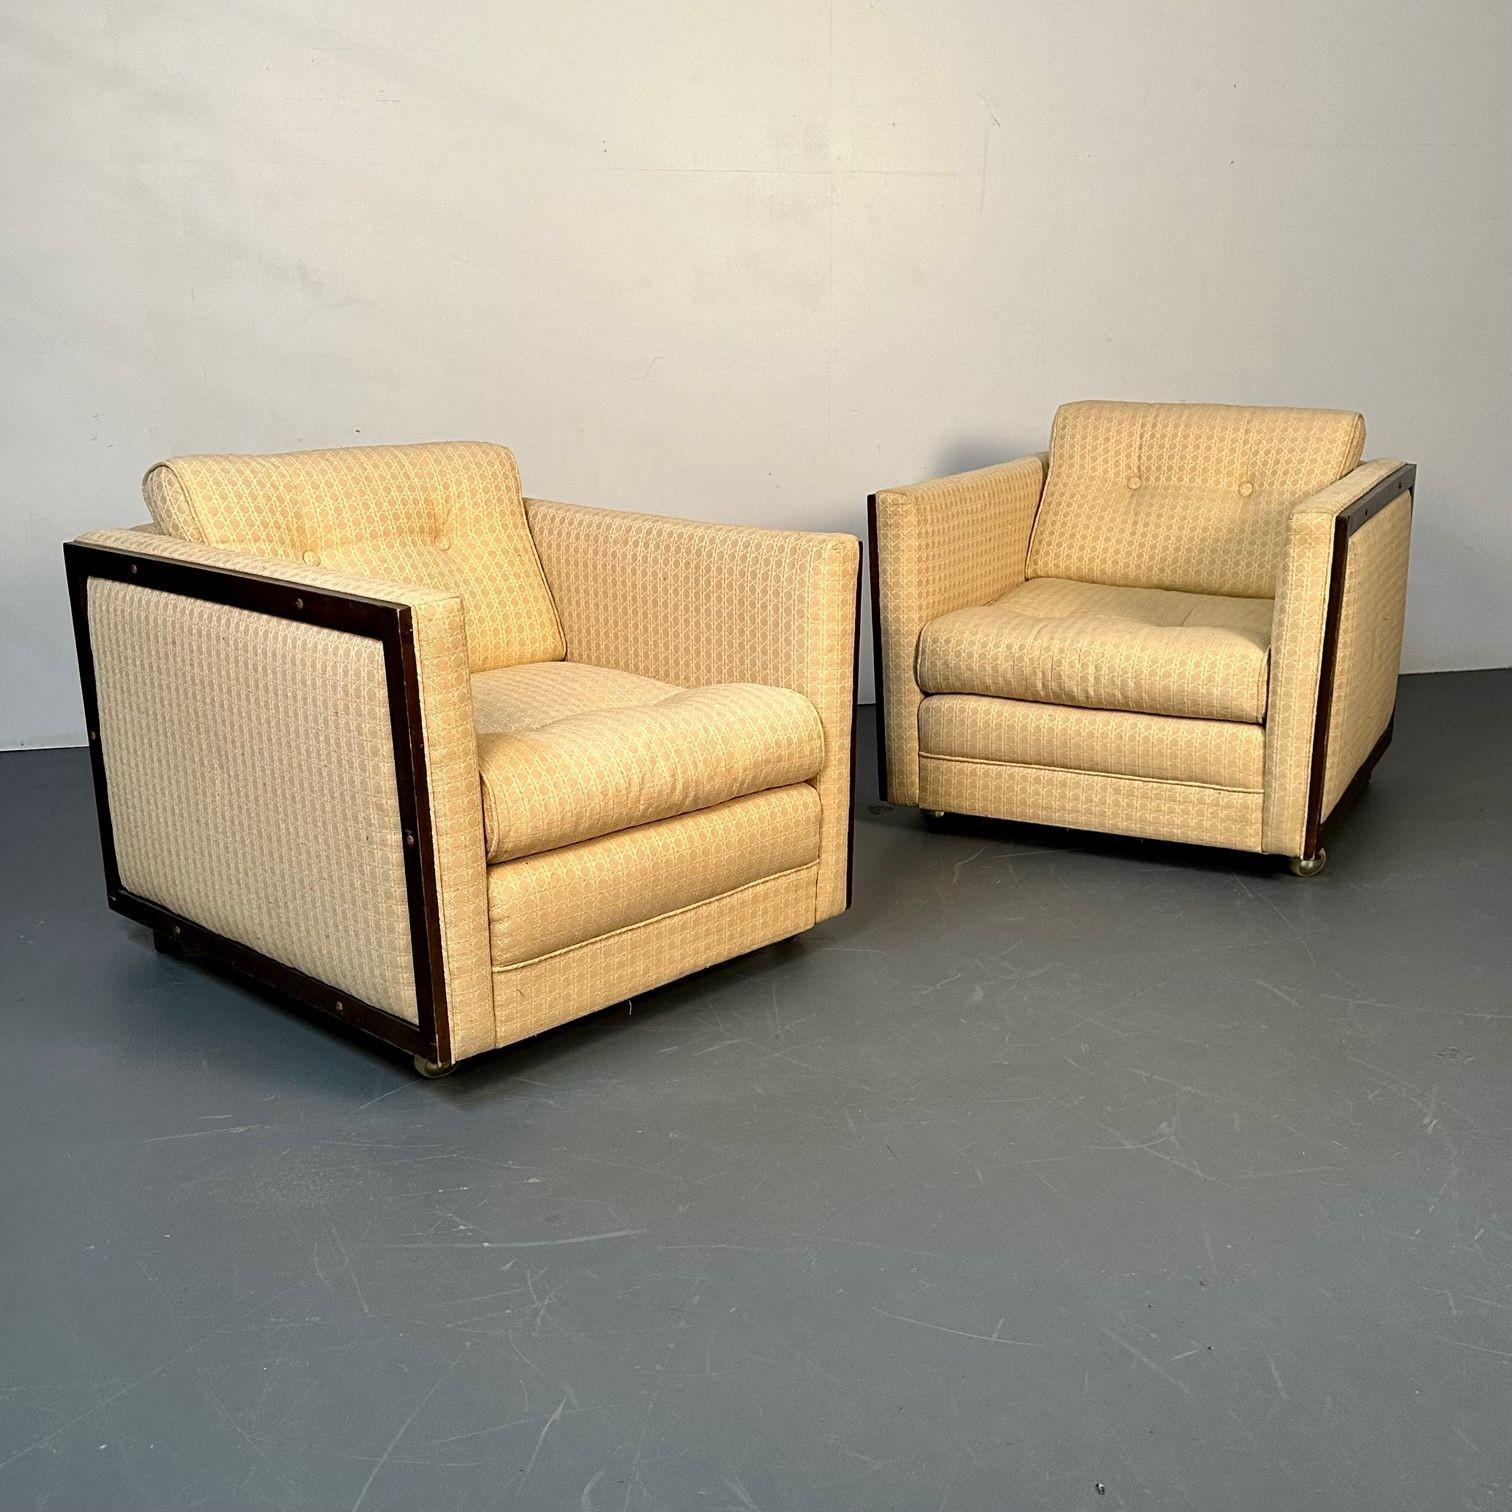 Pair Mid-Century Modern Lounge / Club Chairs, George Nelson Style, Box-Form
 
A sleek and stylish pair of Mid-Century Modern large lounge or club chairs. Each having a wood trim on all sides and rolling casters. These cube form George Nelson